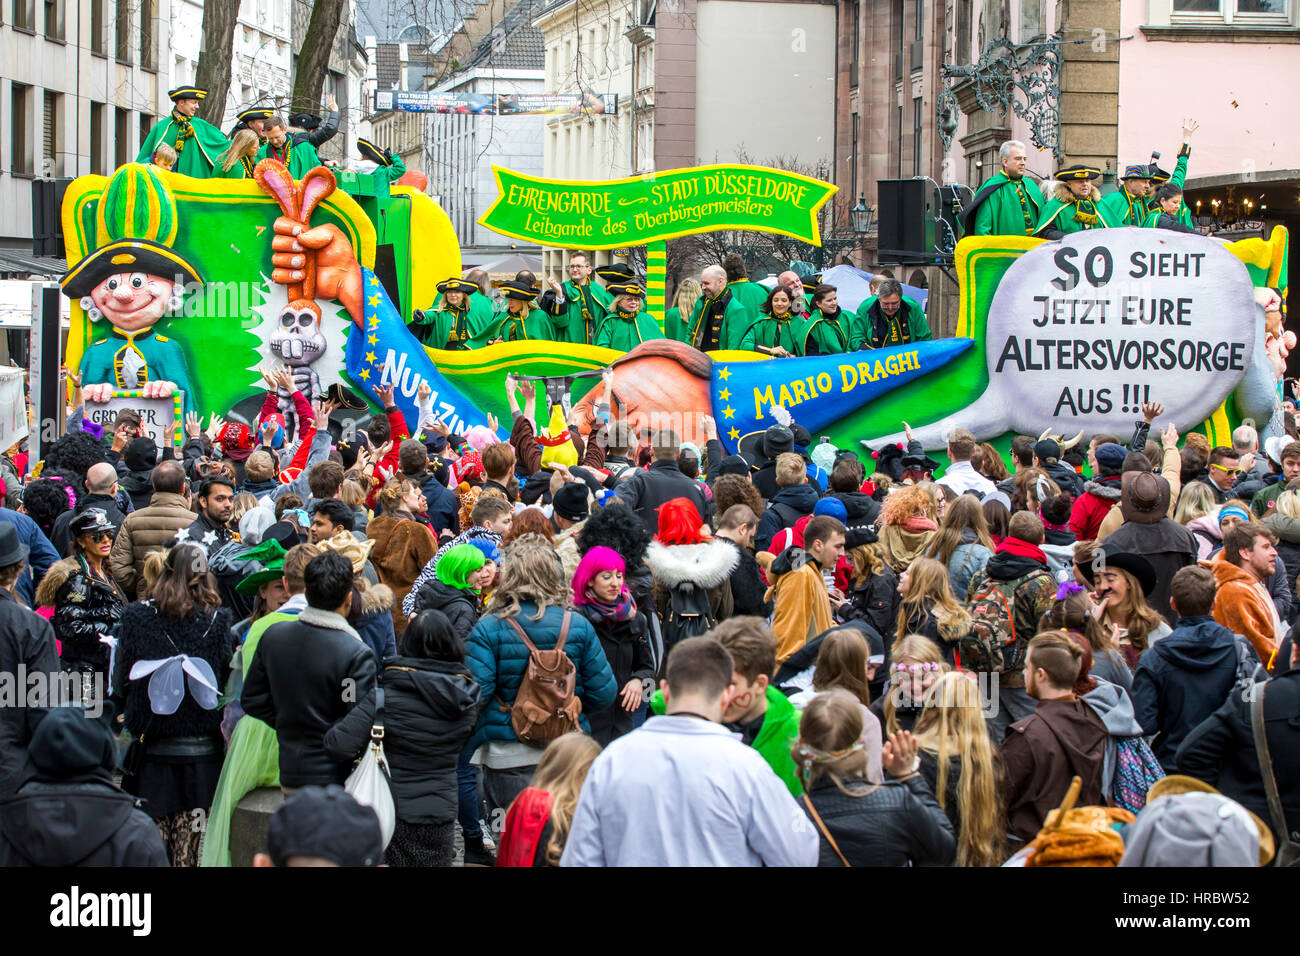 German Carnival parade in DŸsseldorf, Carnival floats designed as political caricatures, Stock Photo